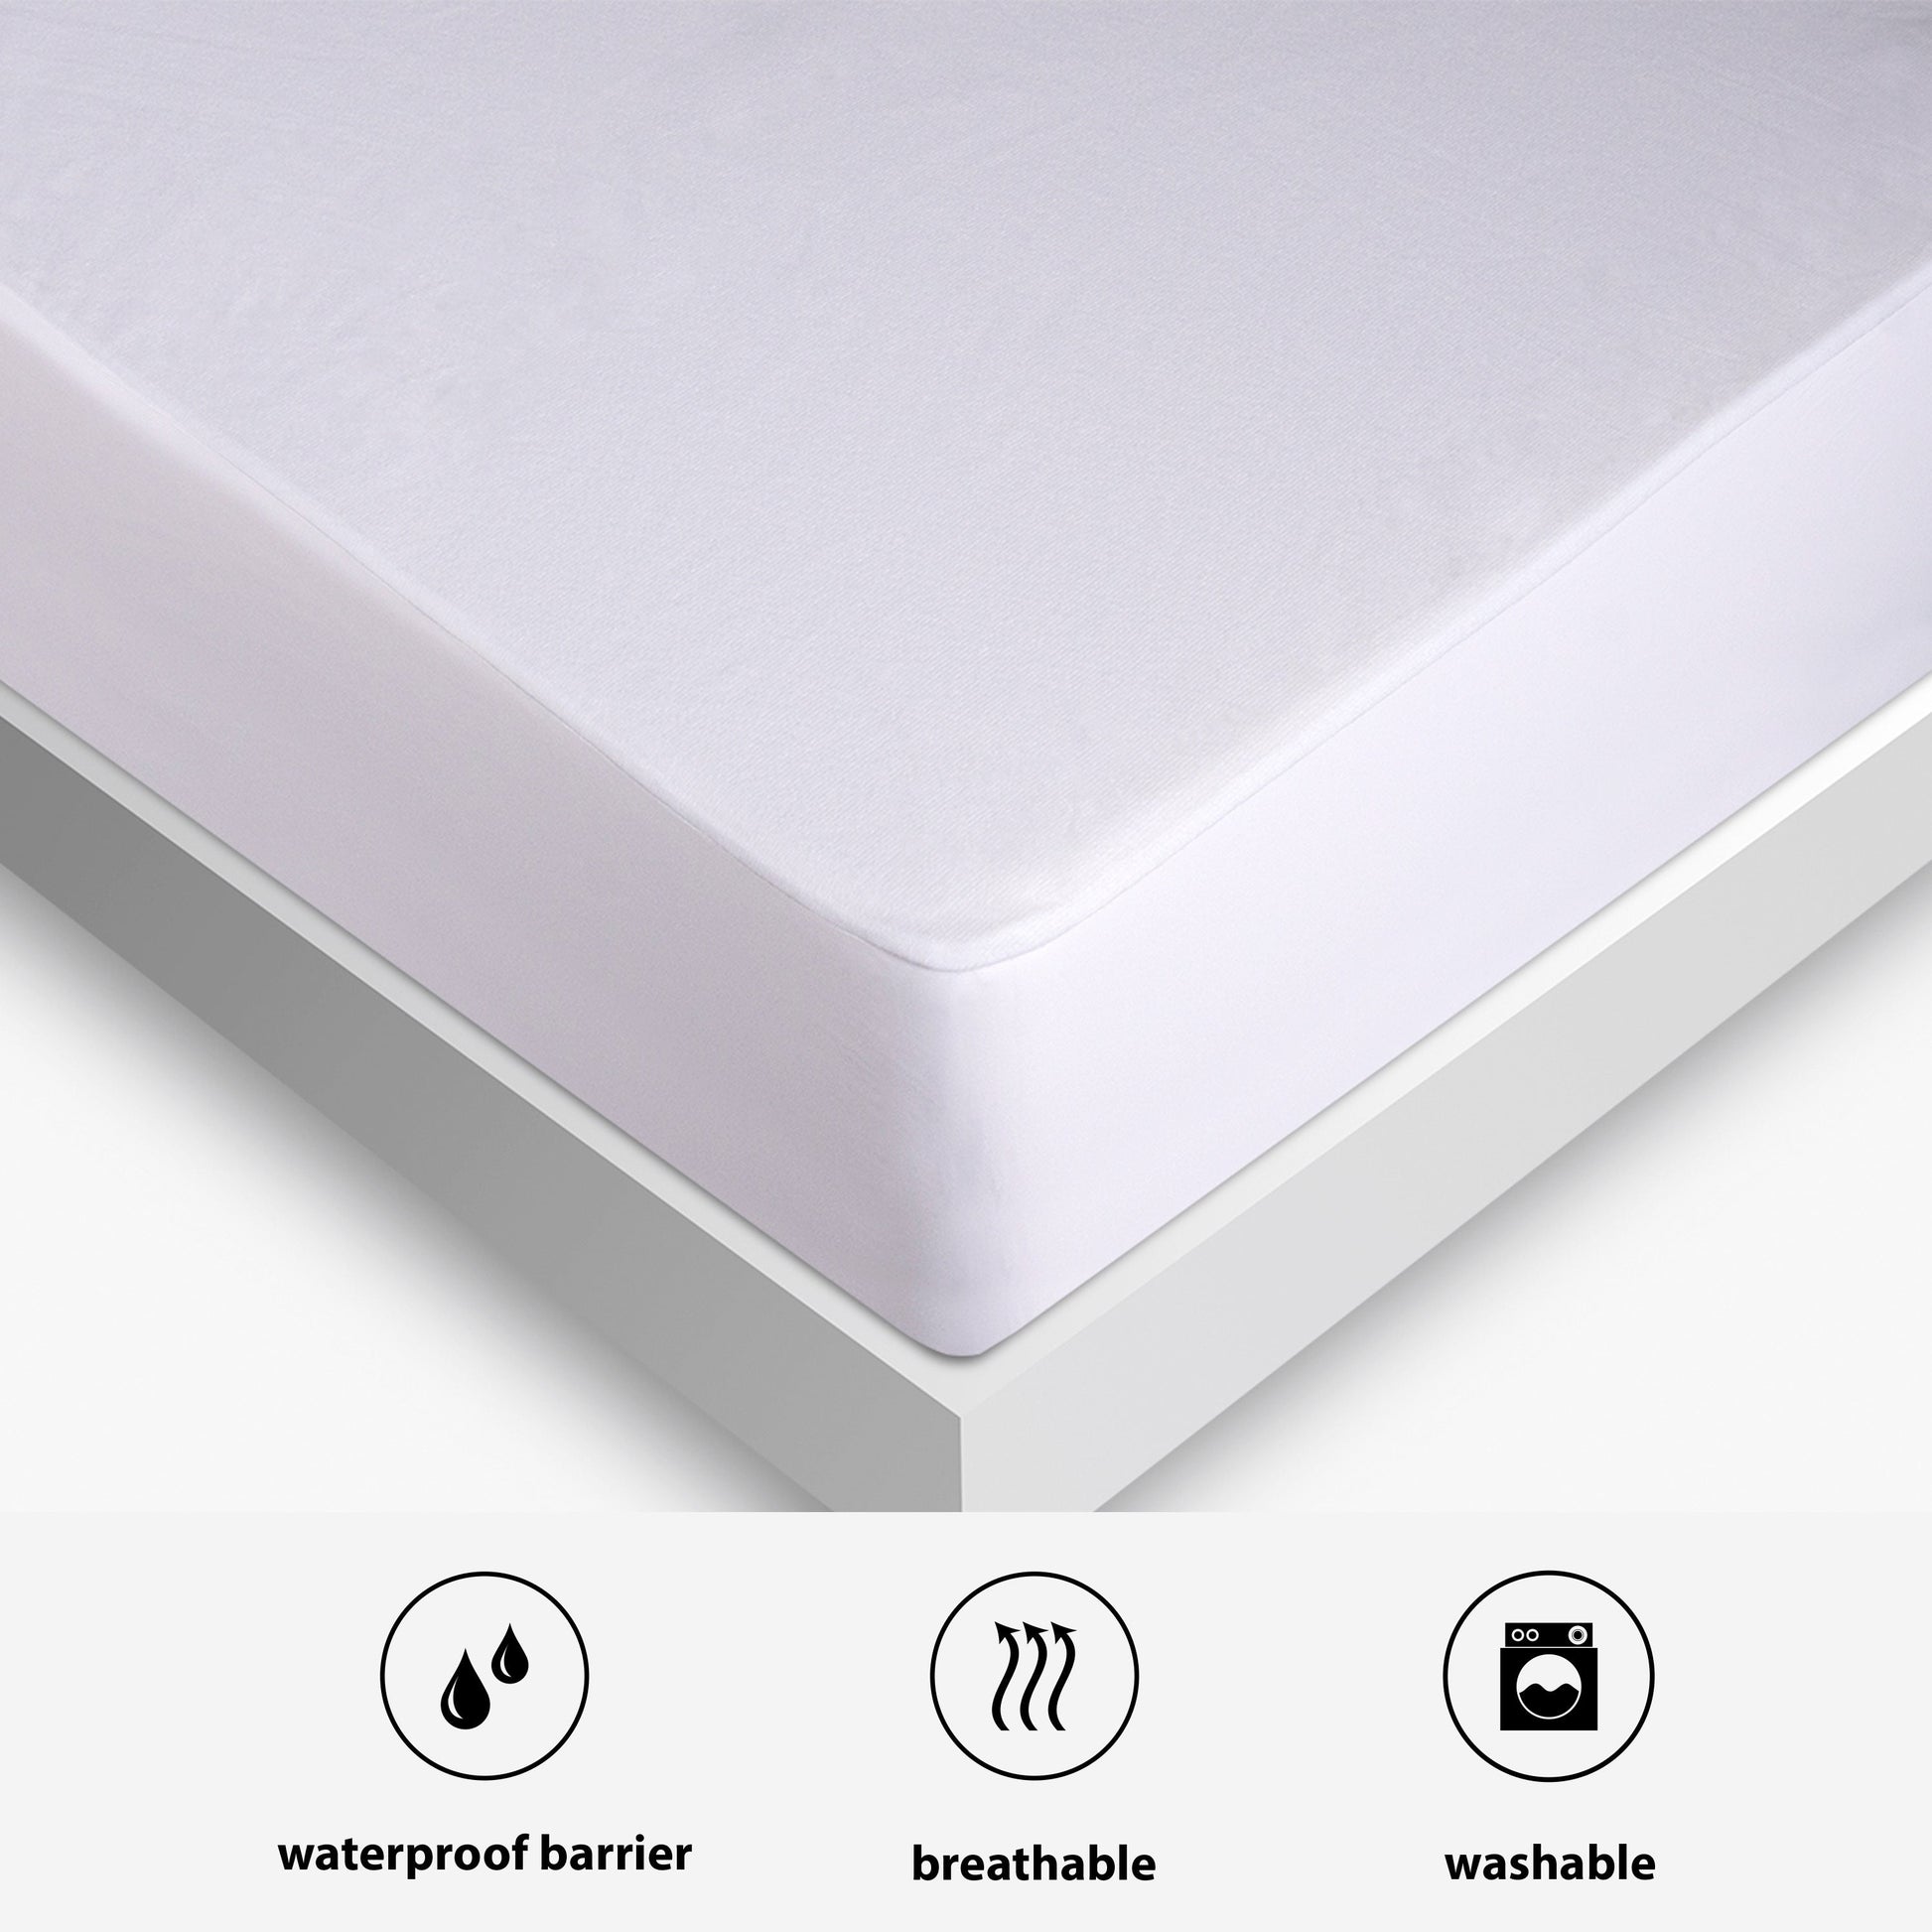 Bedgear iProtect Waterproof Mattress Protector waterproof barrier, breathable, and washable